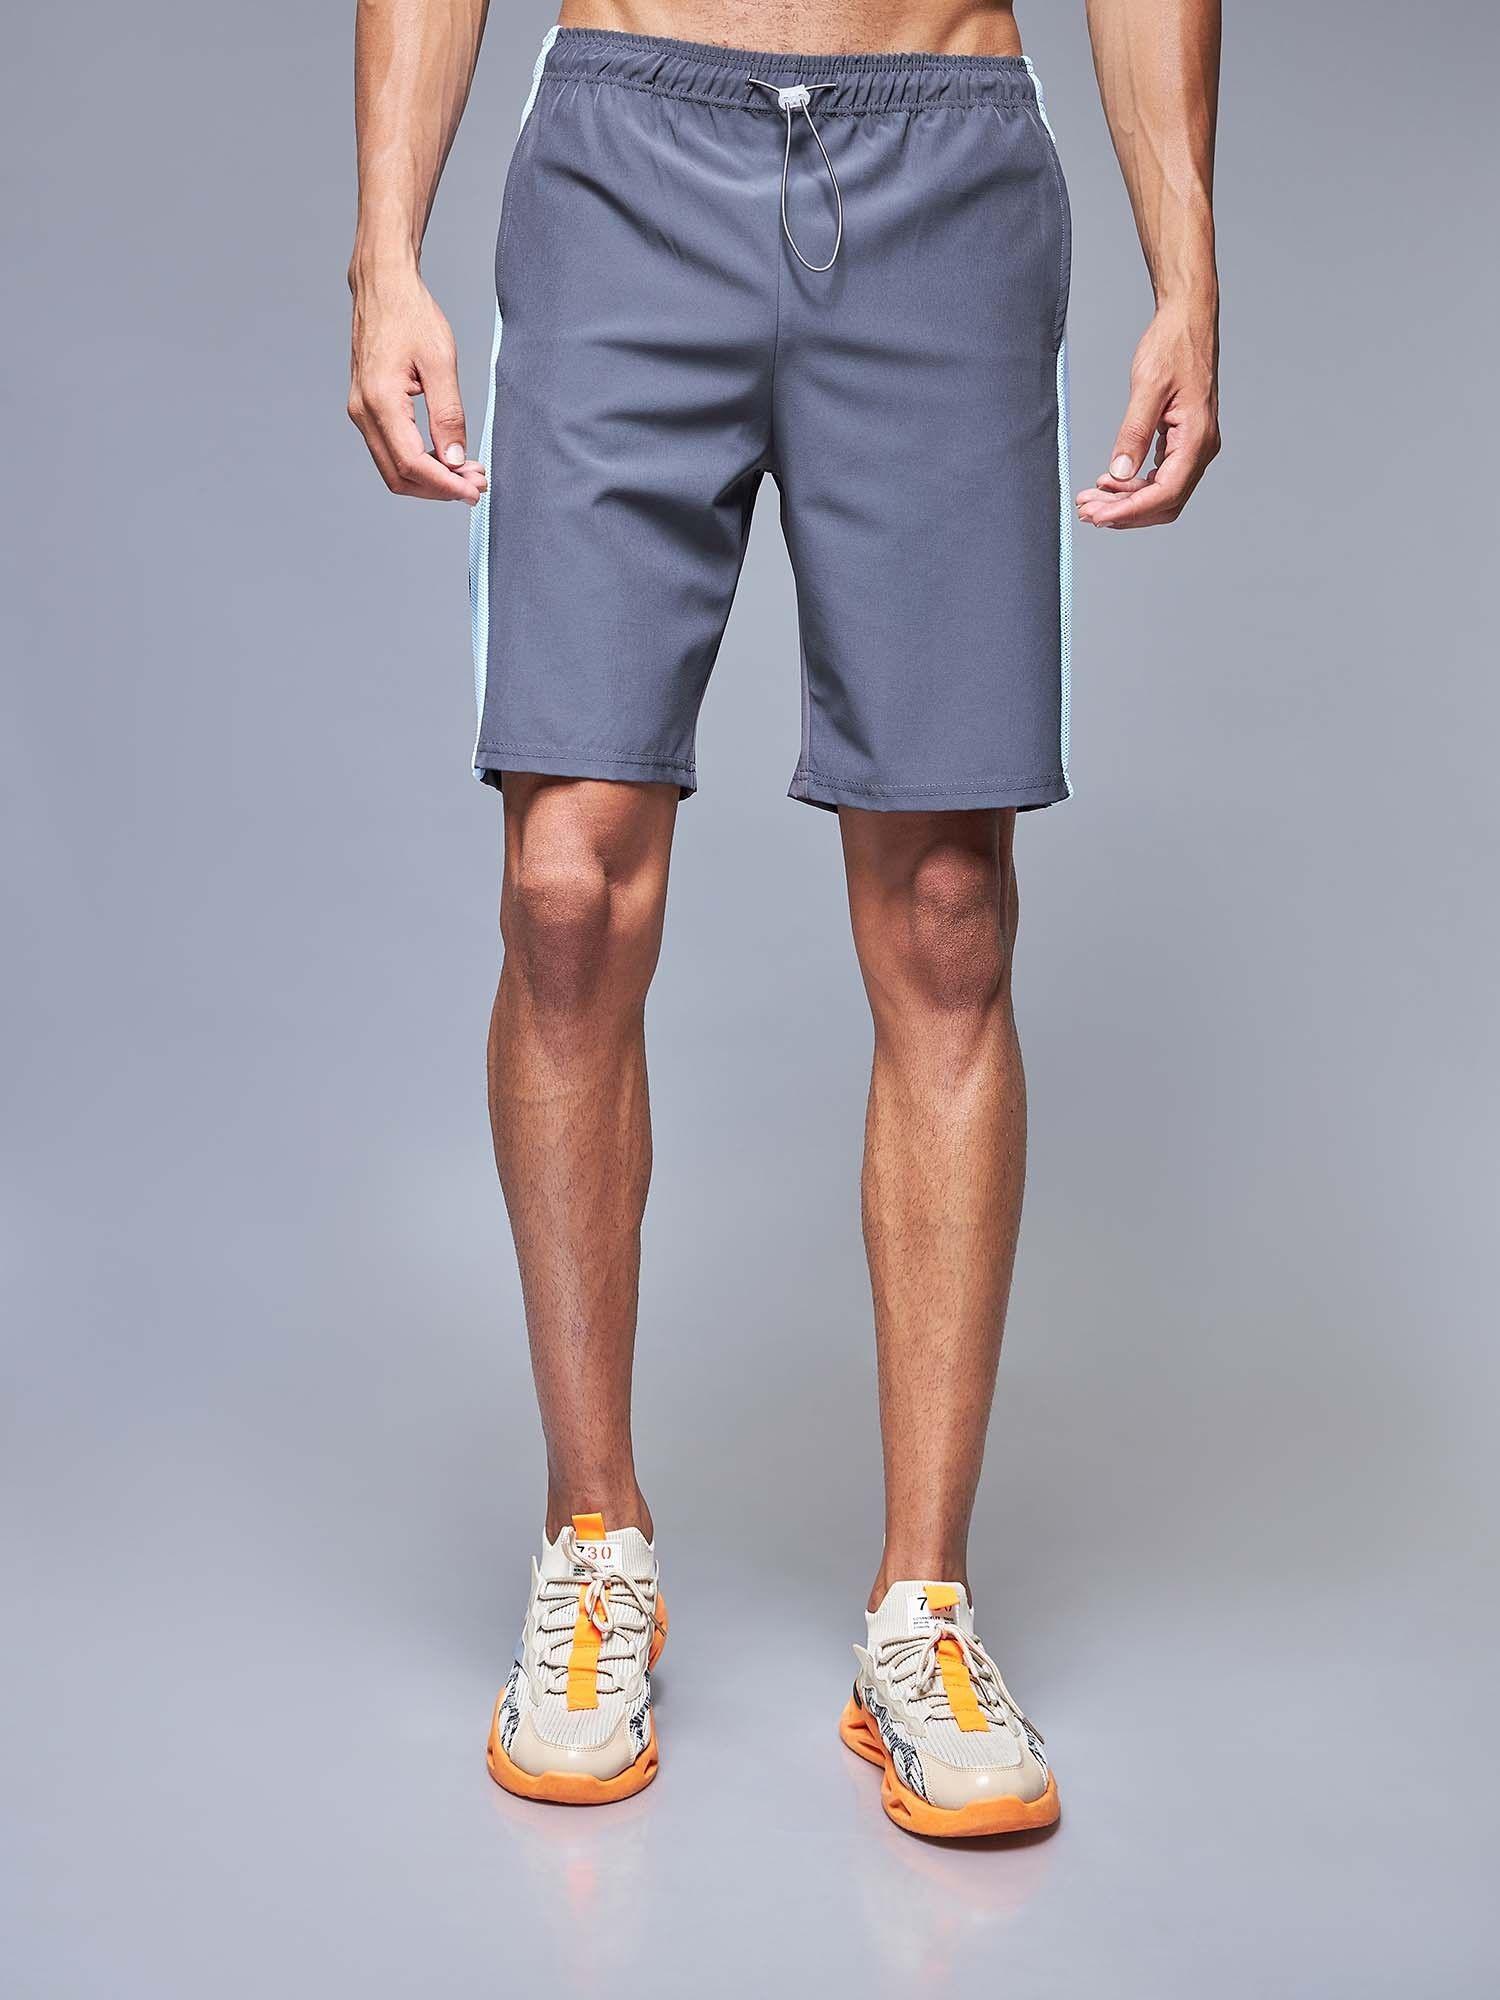 light blue chase rapid dry shorts